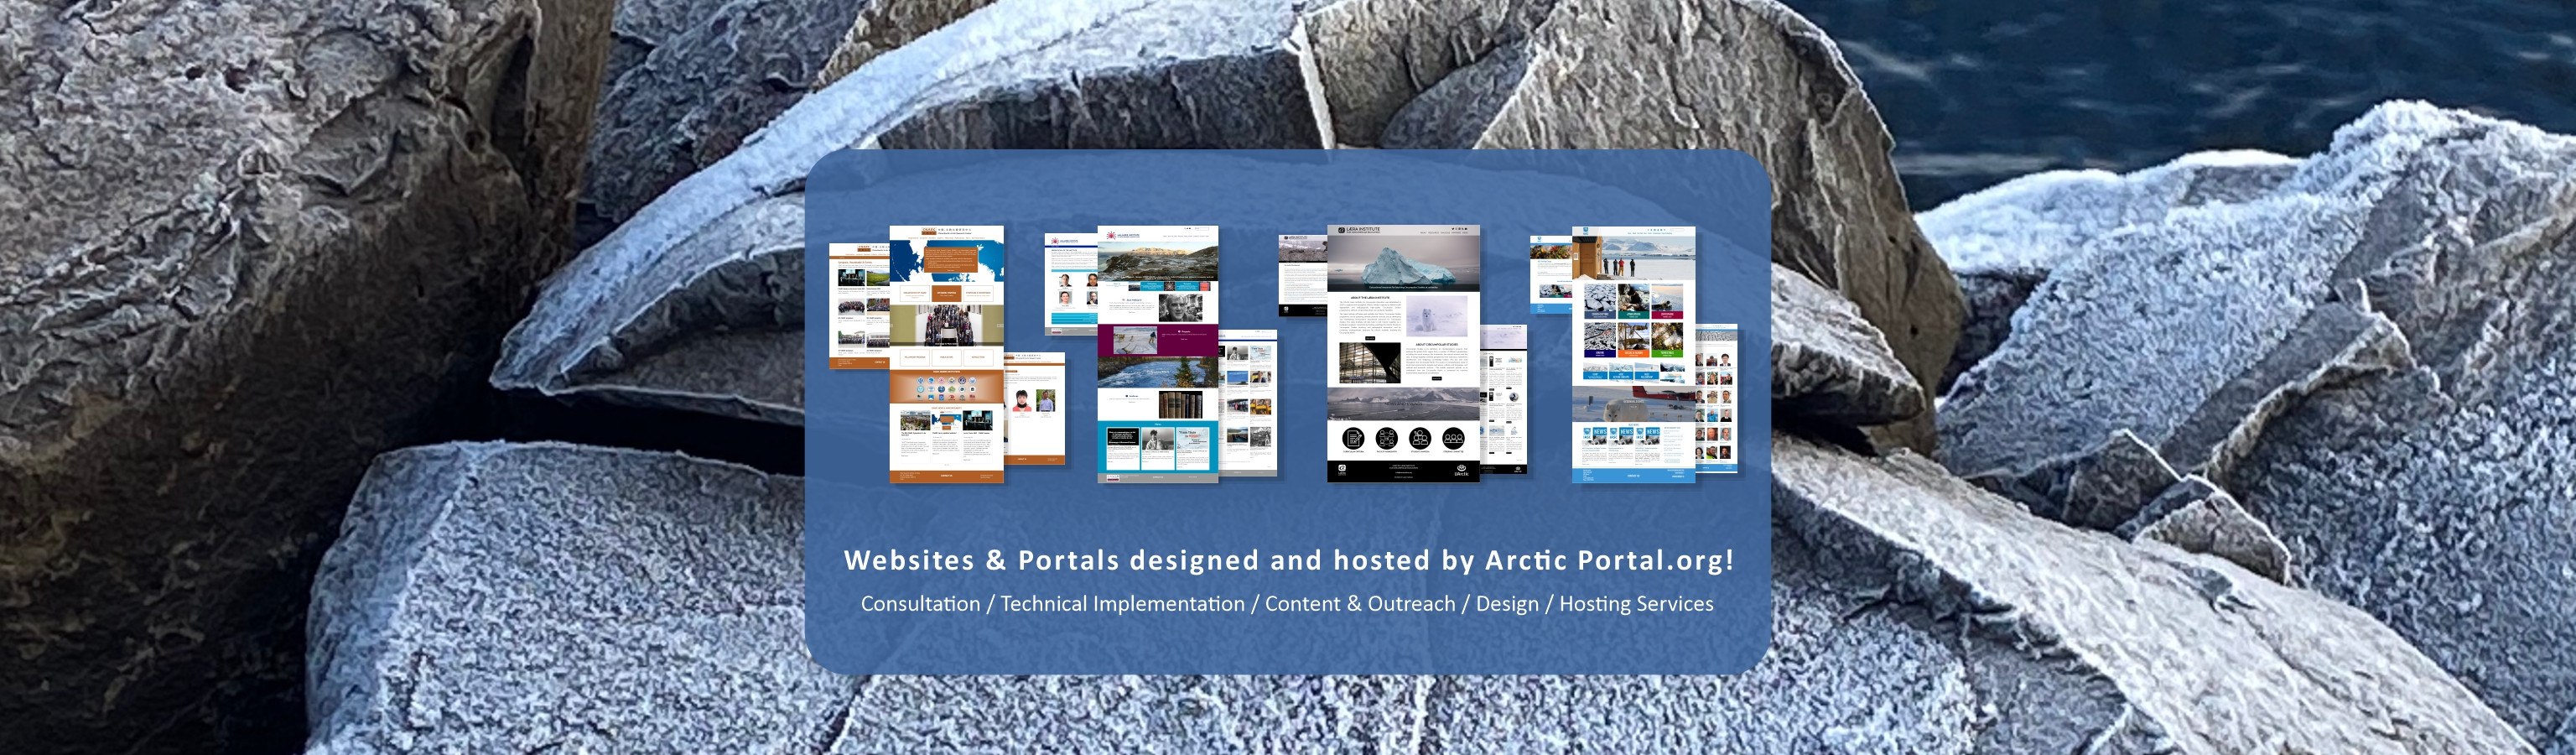 Websites created and designed by Arctic Portal